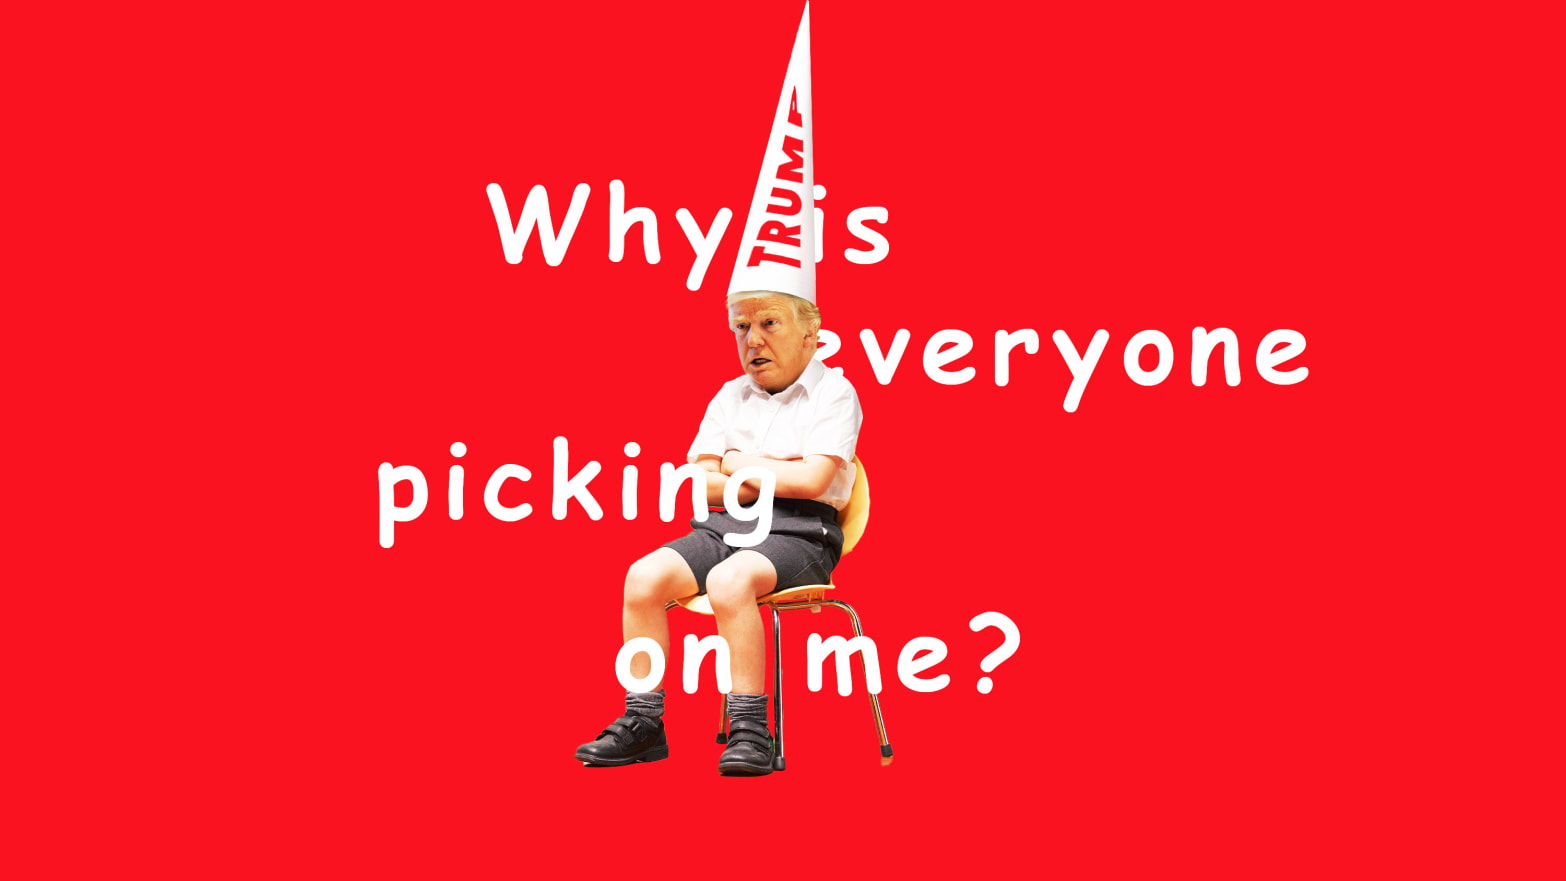 A photo illustration of Donald Trump as a sad child with the words "why is everyone picking on me?" overlayed.